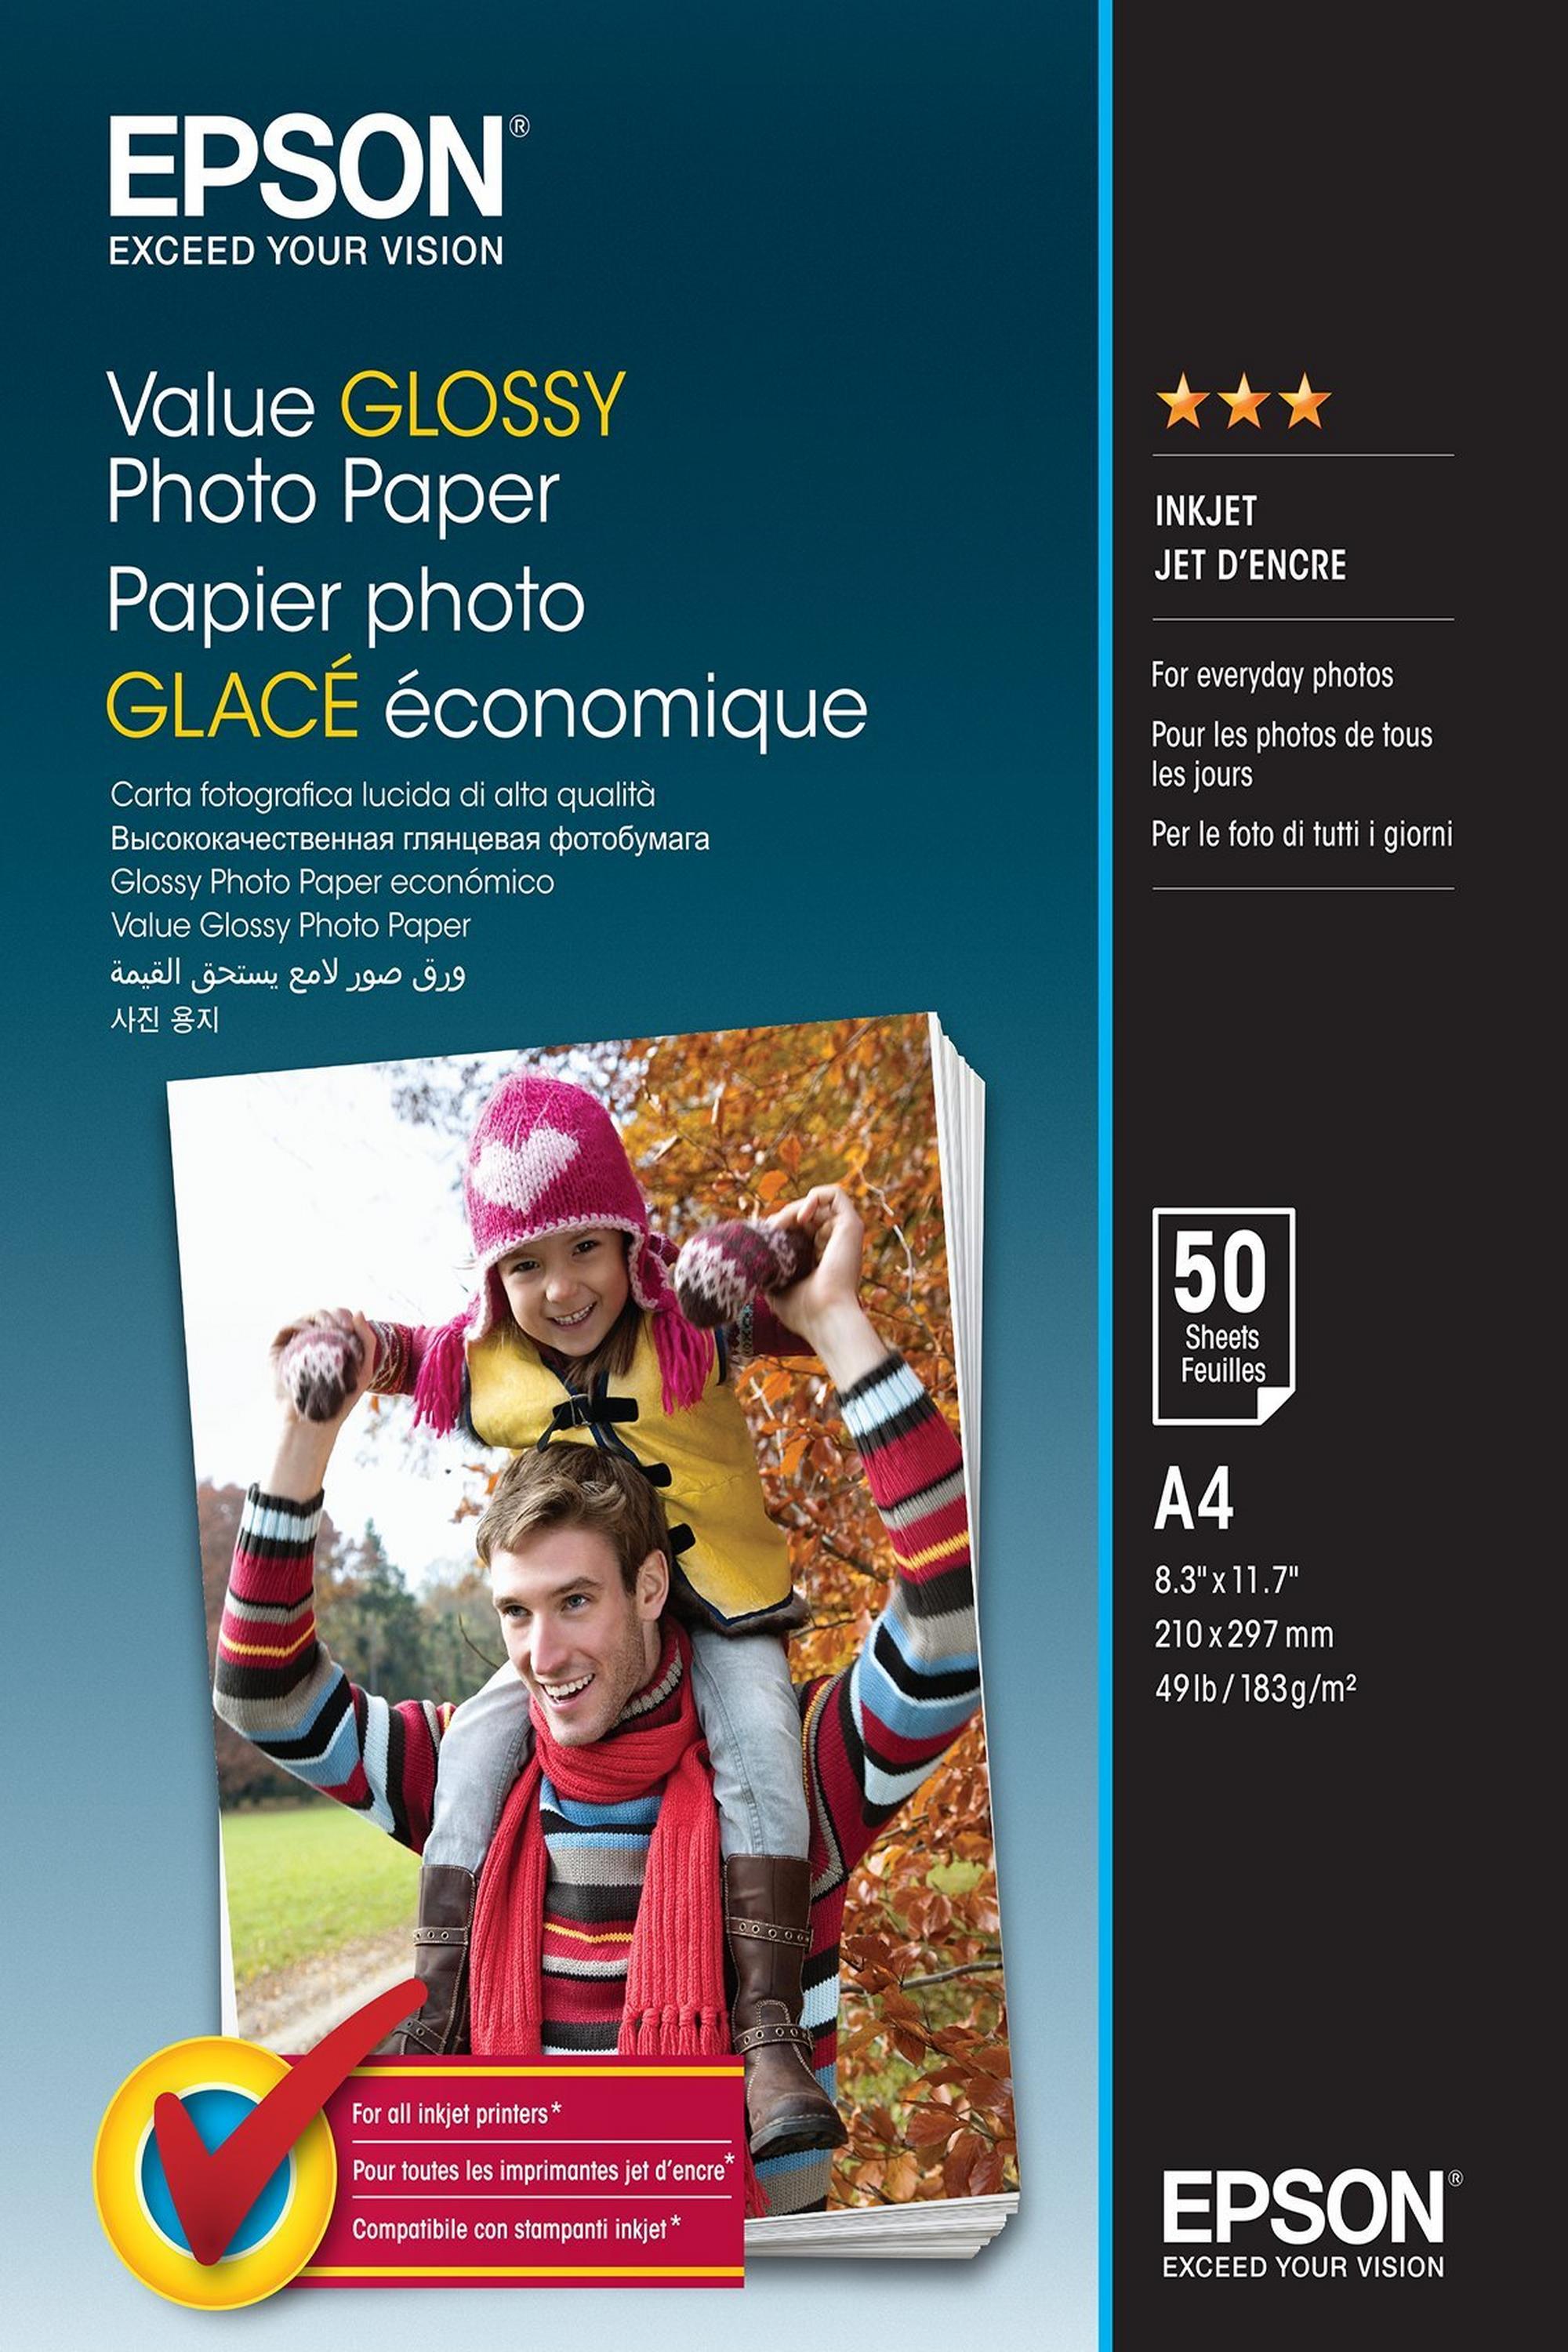 Epson Value Glossy Photo Paper - A4, 183g/m²  - 50 sheets